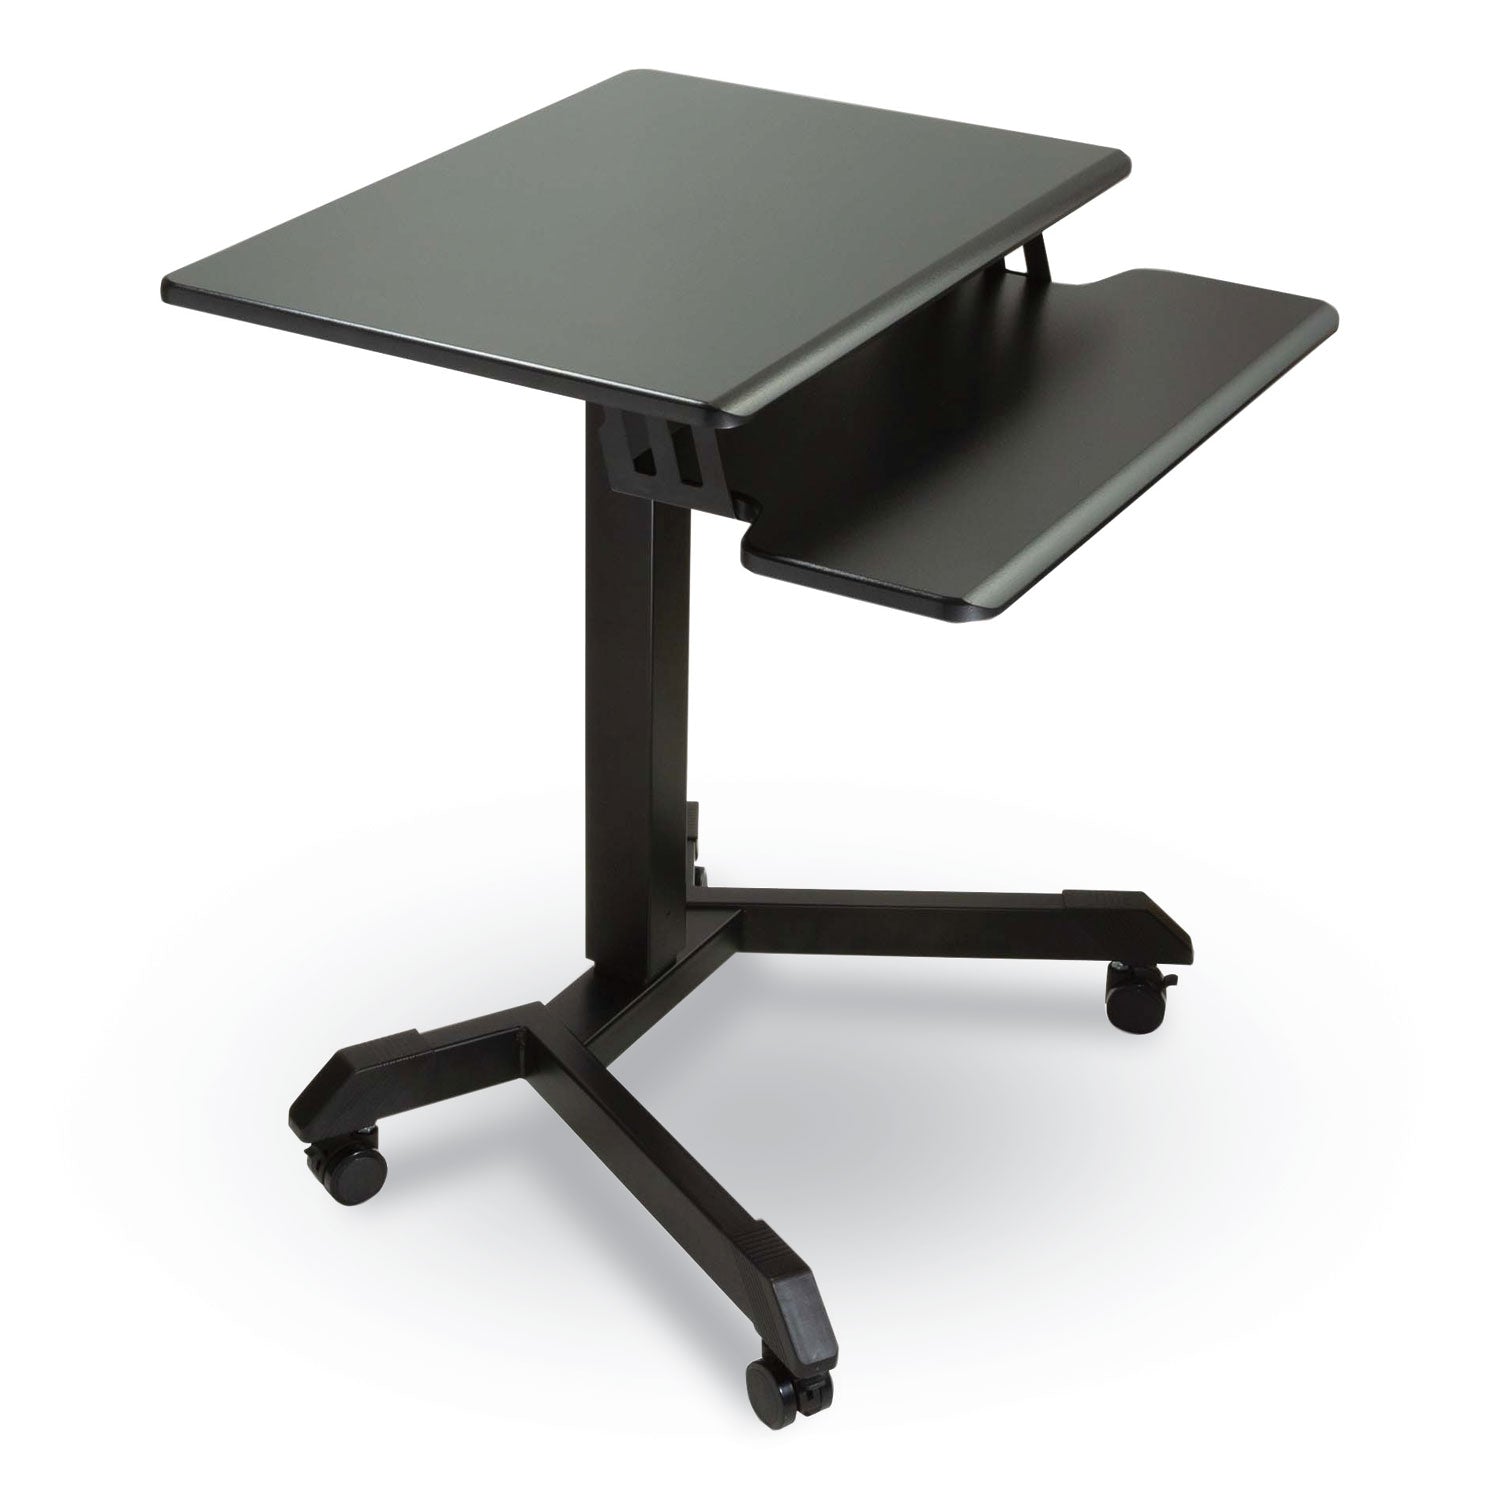 mobile-height-adjustable-standing-desk-with-keyboard-tray-256-x-177-x-29-to-44-black-ships-in-1-3-business-days_vctdc550 - 1